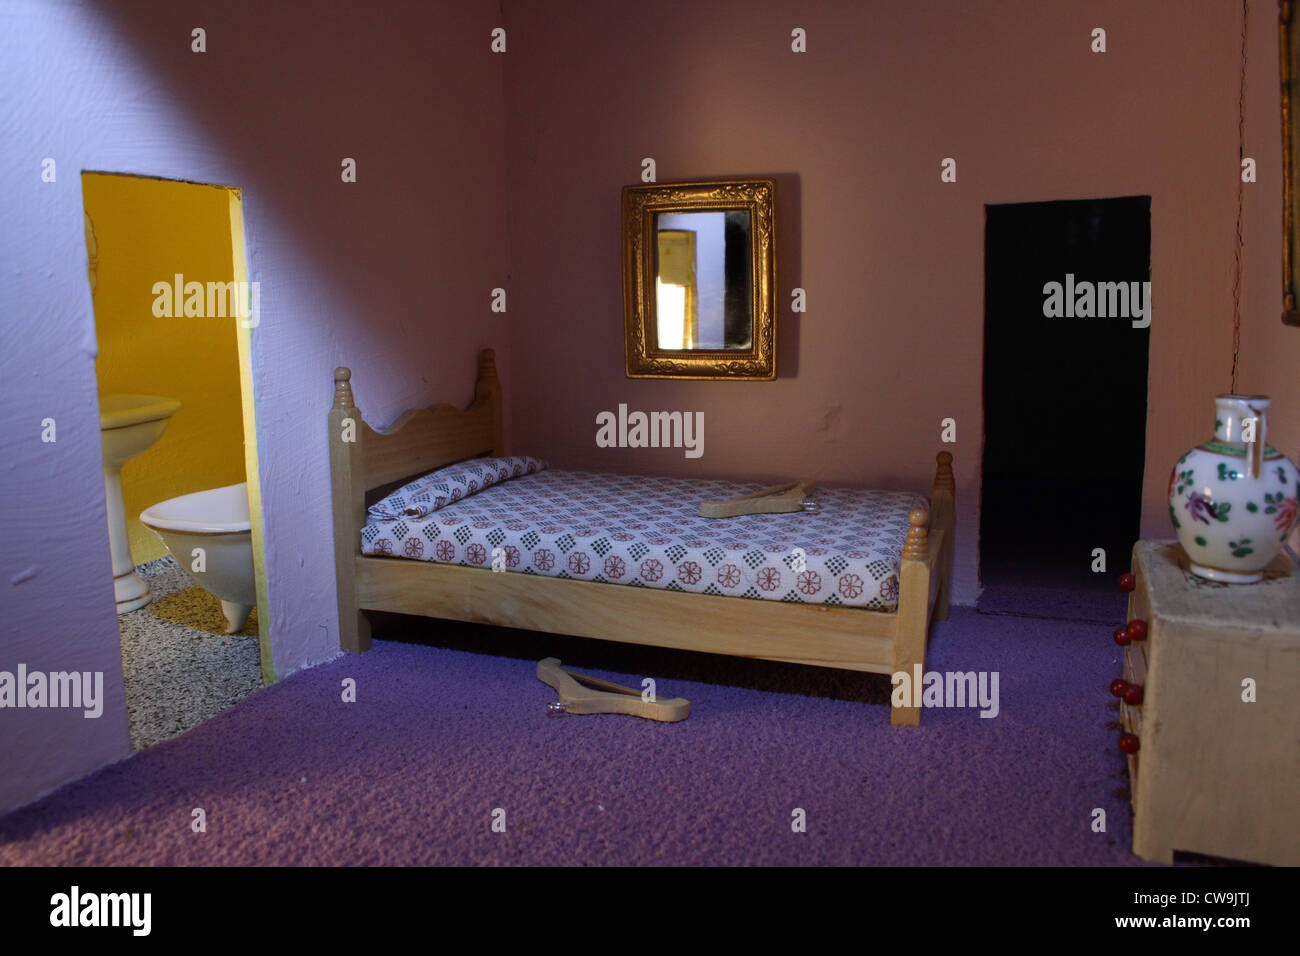 Bedroom in a dolls house. Stock Photo